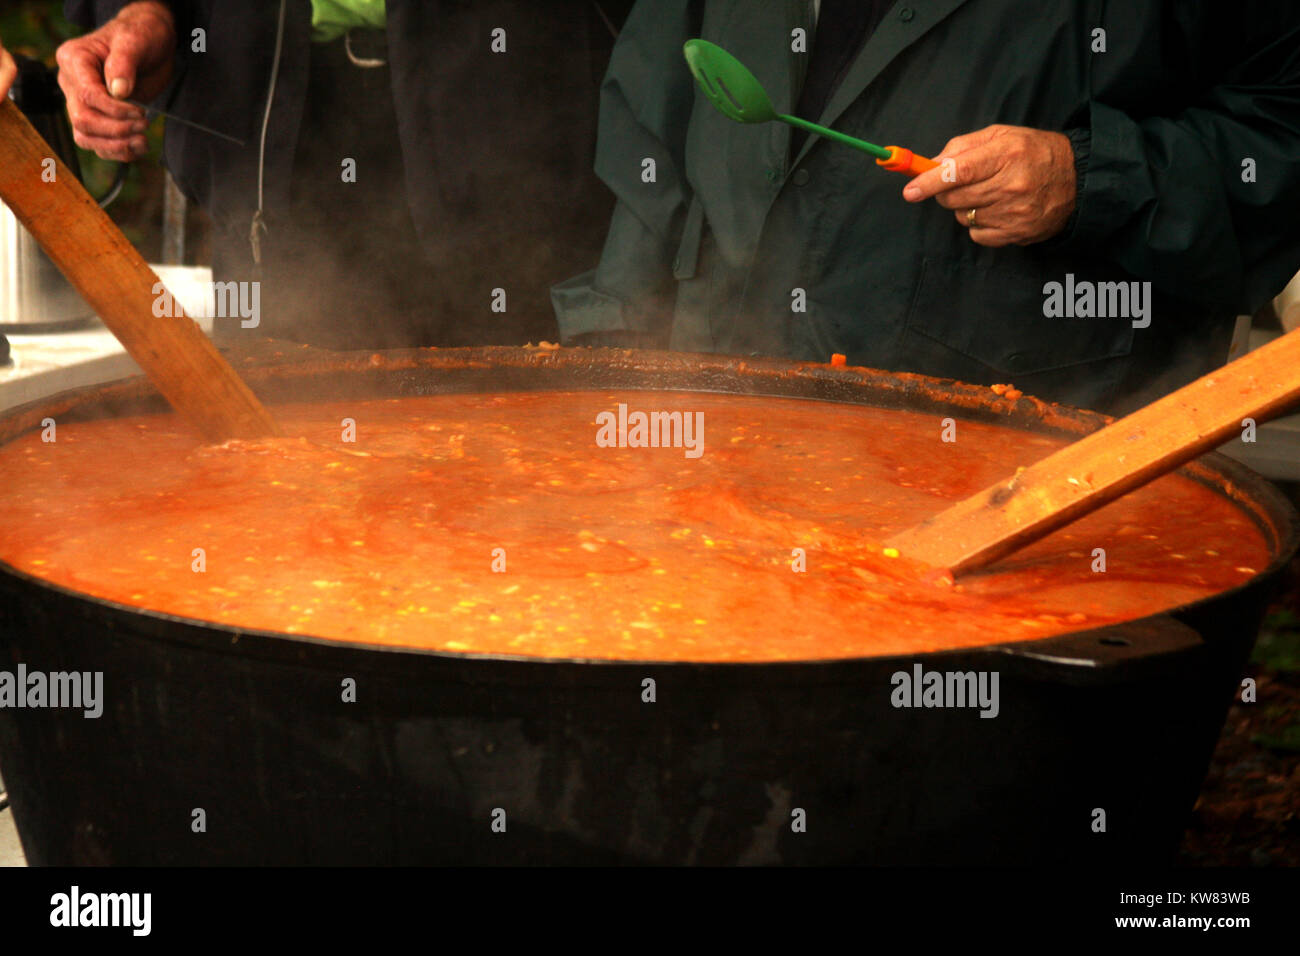 https://c8.alamy.com/comp/KW83WB/people-around-large-pot-with-boiling-stew-outside-in-the-yard-KW83WB.jpg